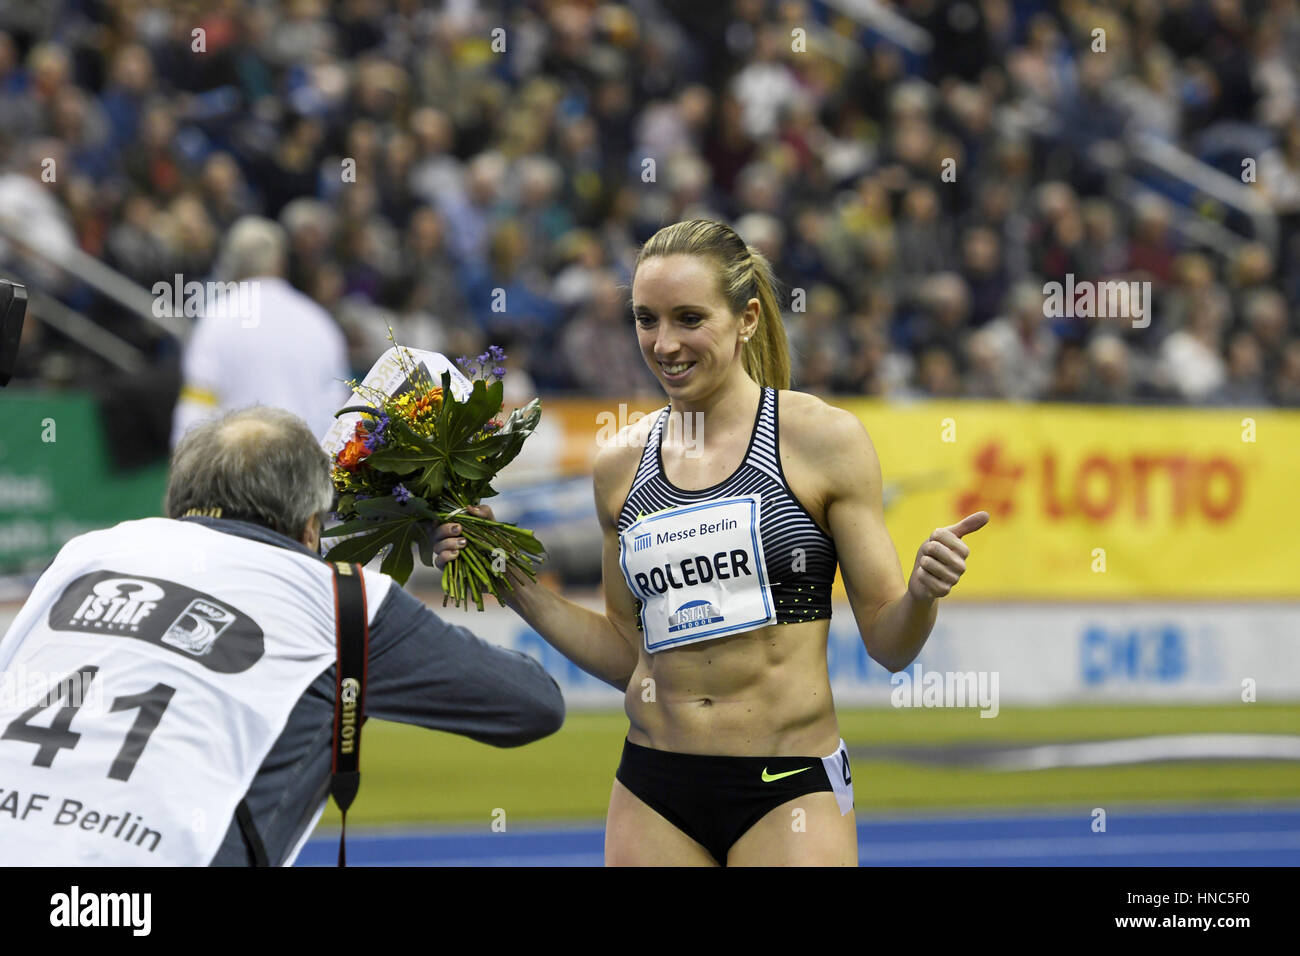 Berlin, Germany. 10th February 2017. ISTAF Indoor 2017, Mercedes-Benz Arena in Berlin, Germany. 60 meters of hurdles women Final winner Cindy Roleder (Germany) in time of 7.85 seconds. February, 2017. Credit: Paul Velasco/Alamy Live News Stock Photo